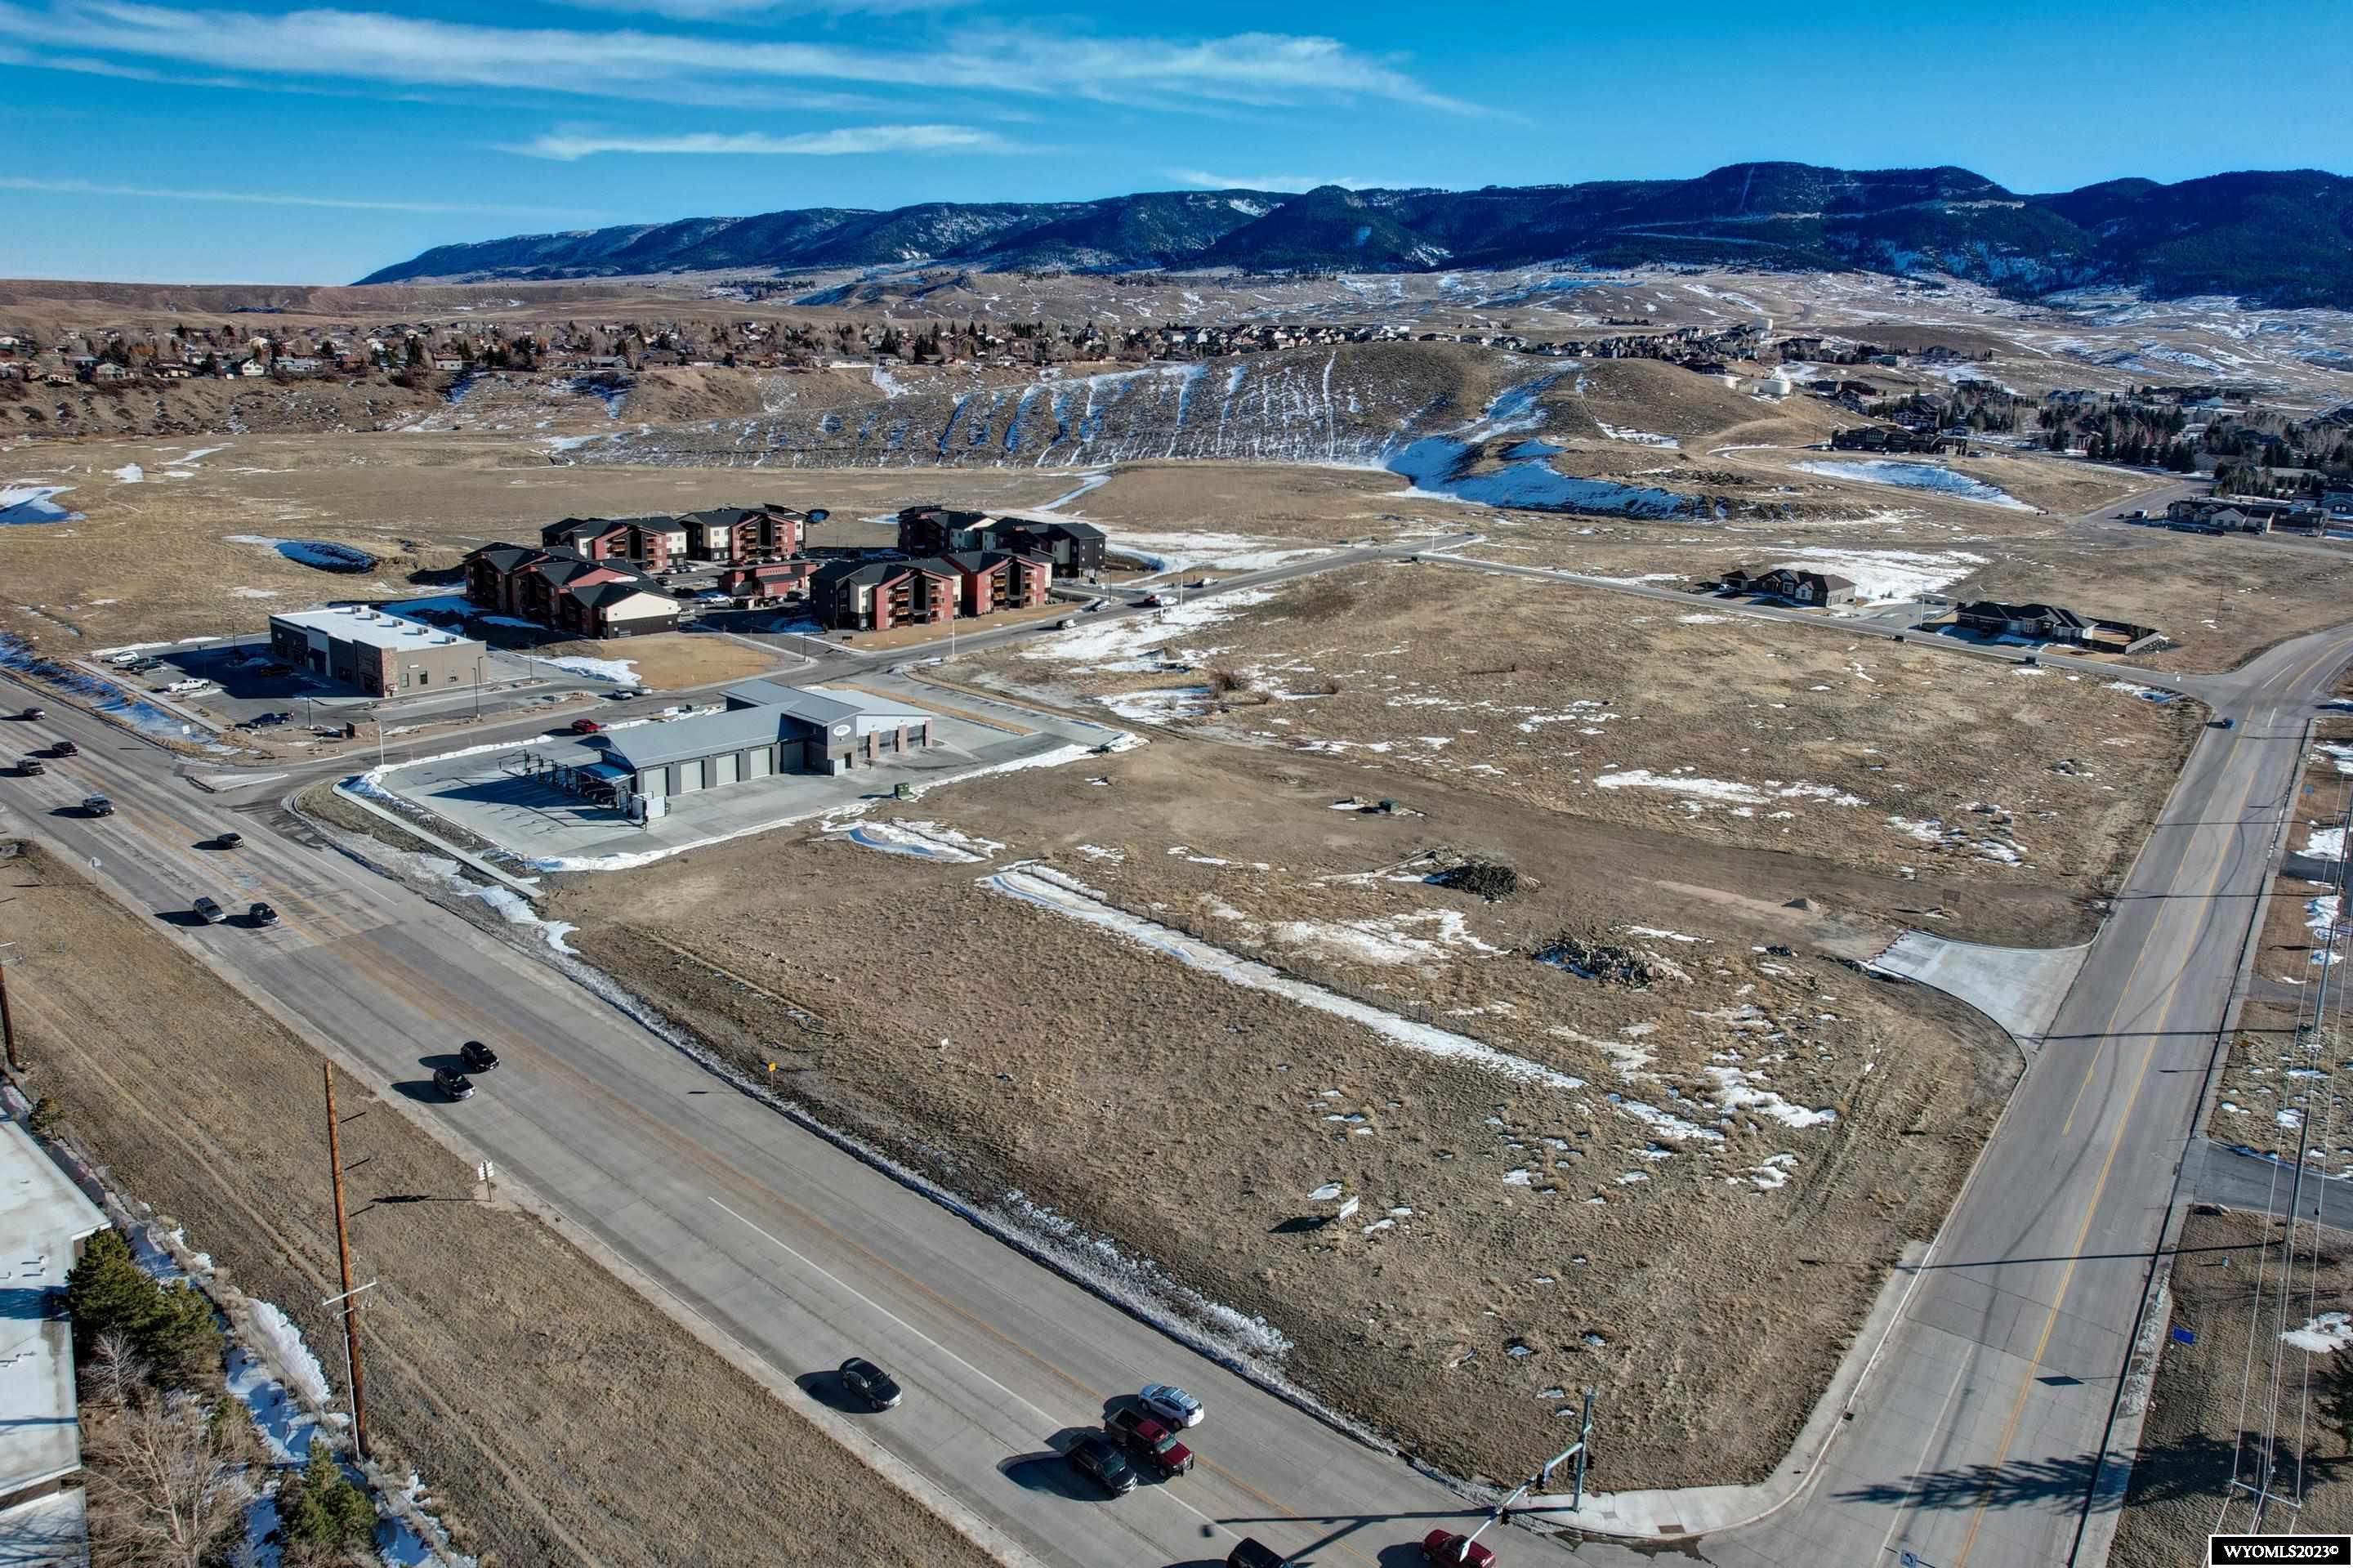 Awesome! Development land available in Casper City limits!!! 68.09 acres adjacent to commercial and residential developments with excellent visibility from Wyoming Blvd making this a convenient location! Call Lisa Burridge at 307-259-3631 to learn more!